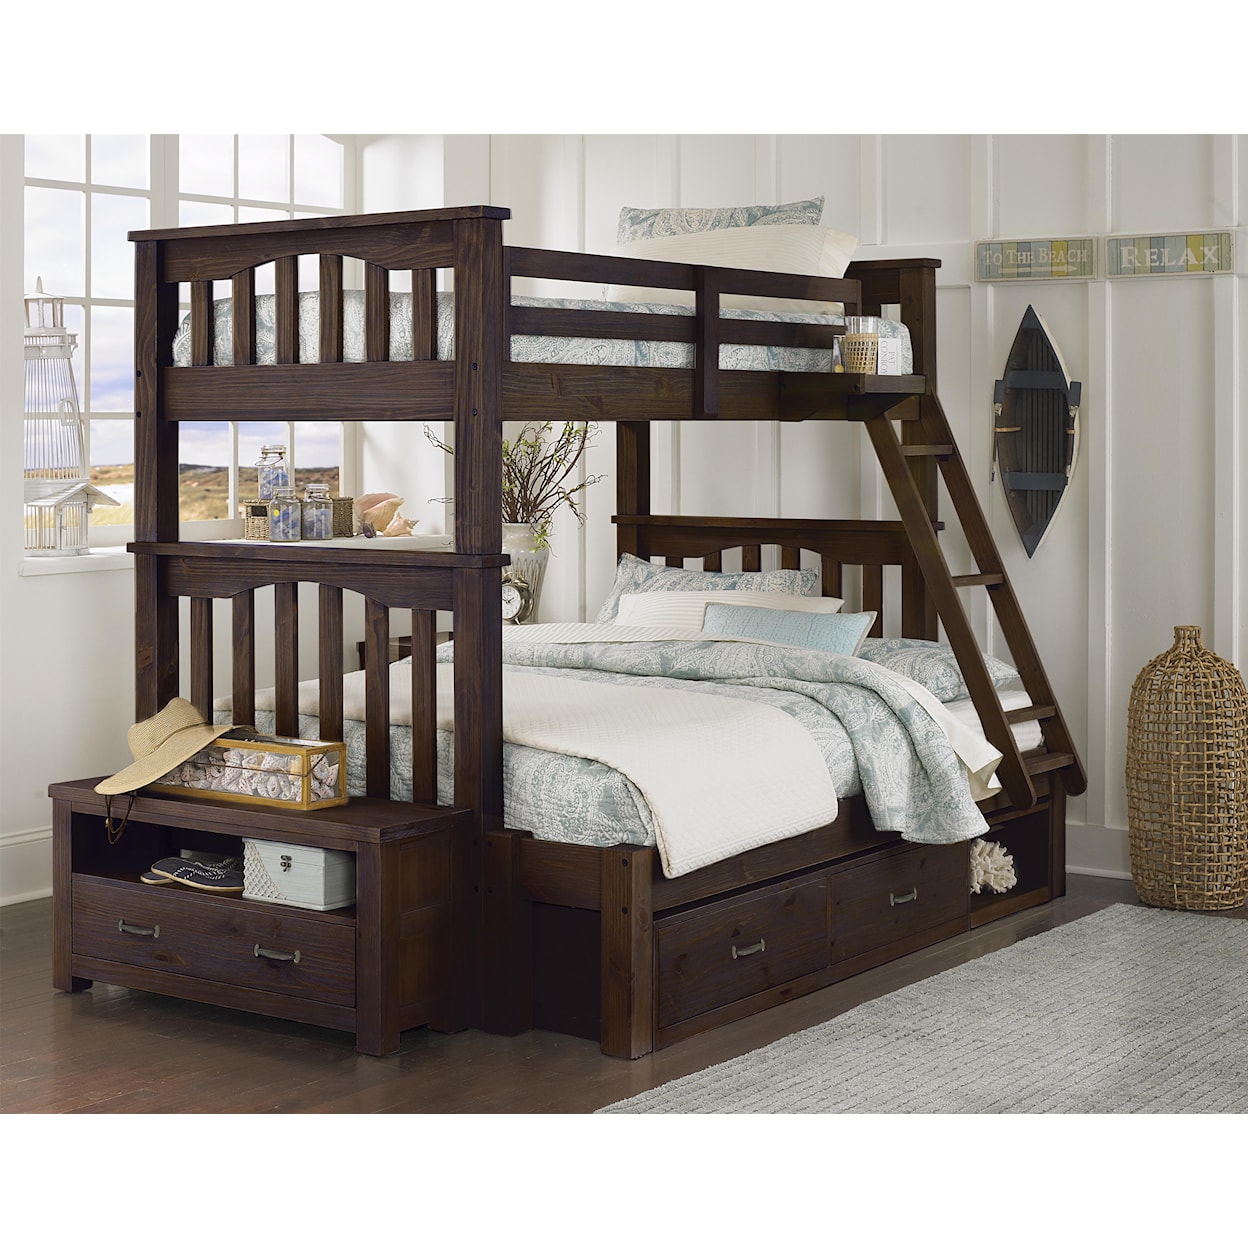 Hillsdale Kids Highlands Twin Over Full Harper Bunk Bed with Storage